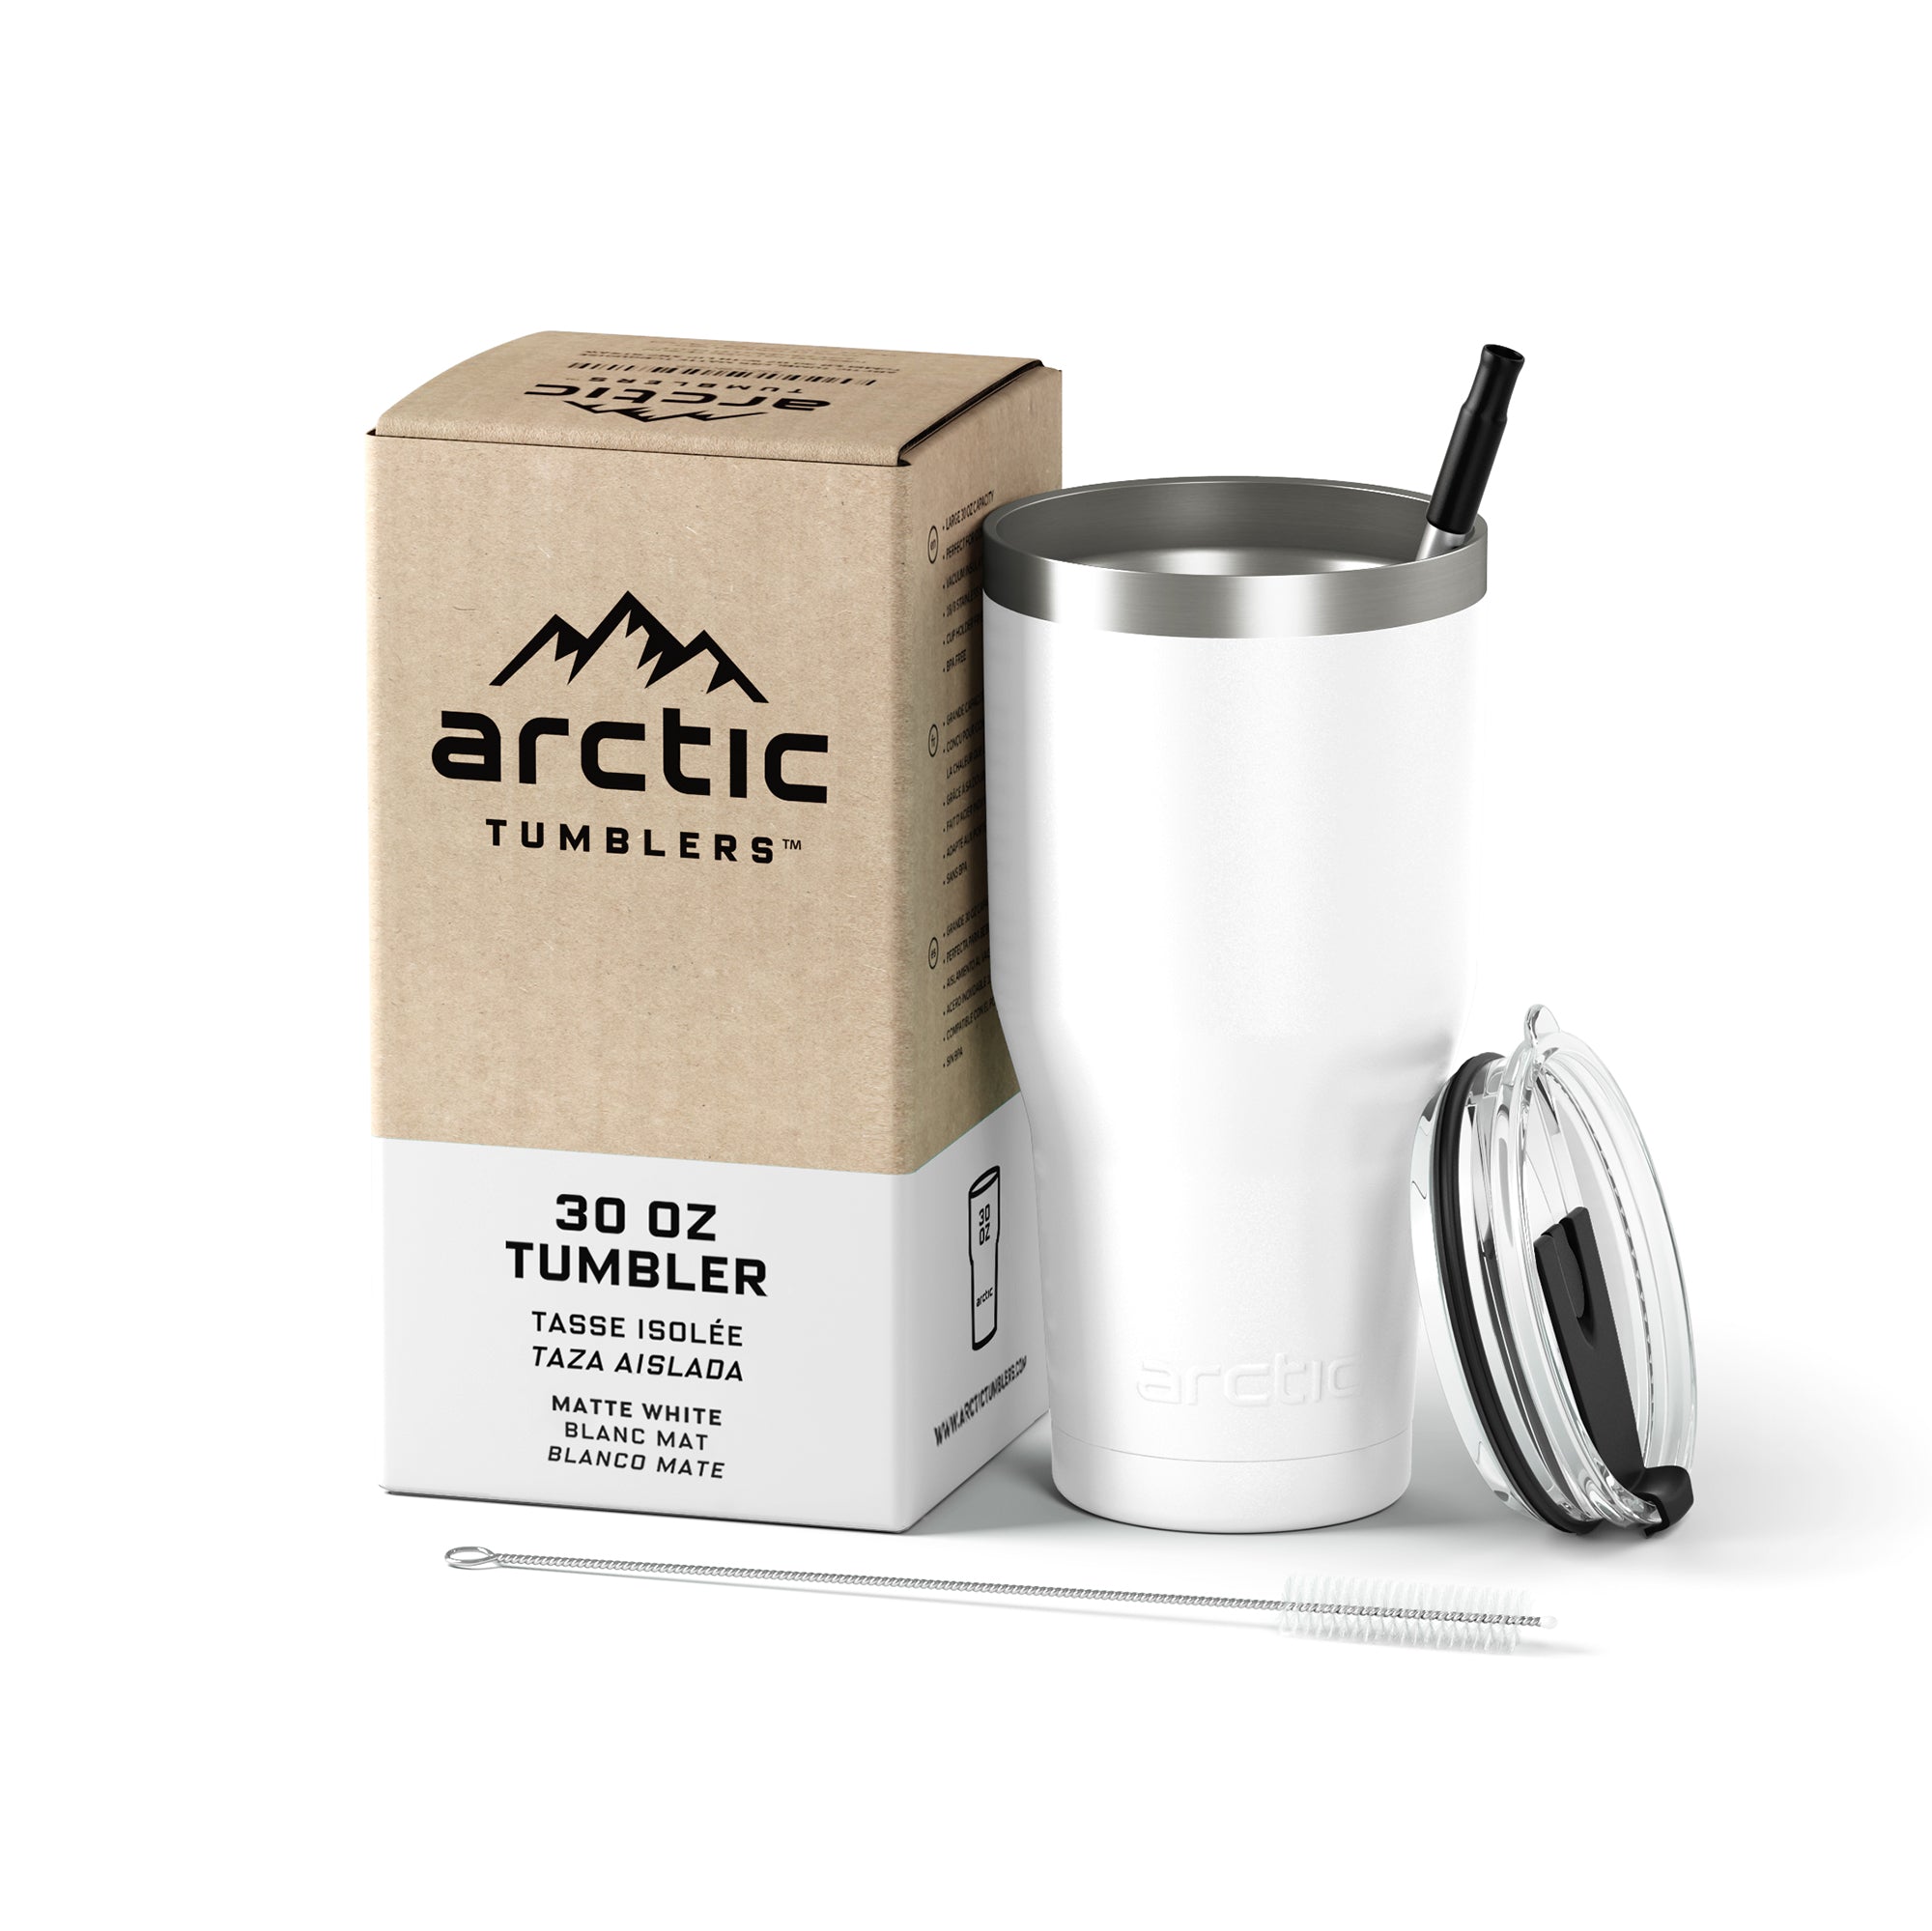 Arctic Tumblers | 30 oz Matte Black Insulated Tumbler with Straw & Cleaner  - Retains Temperature up …See more Arctic Tumblers | 30 oz Matte Black